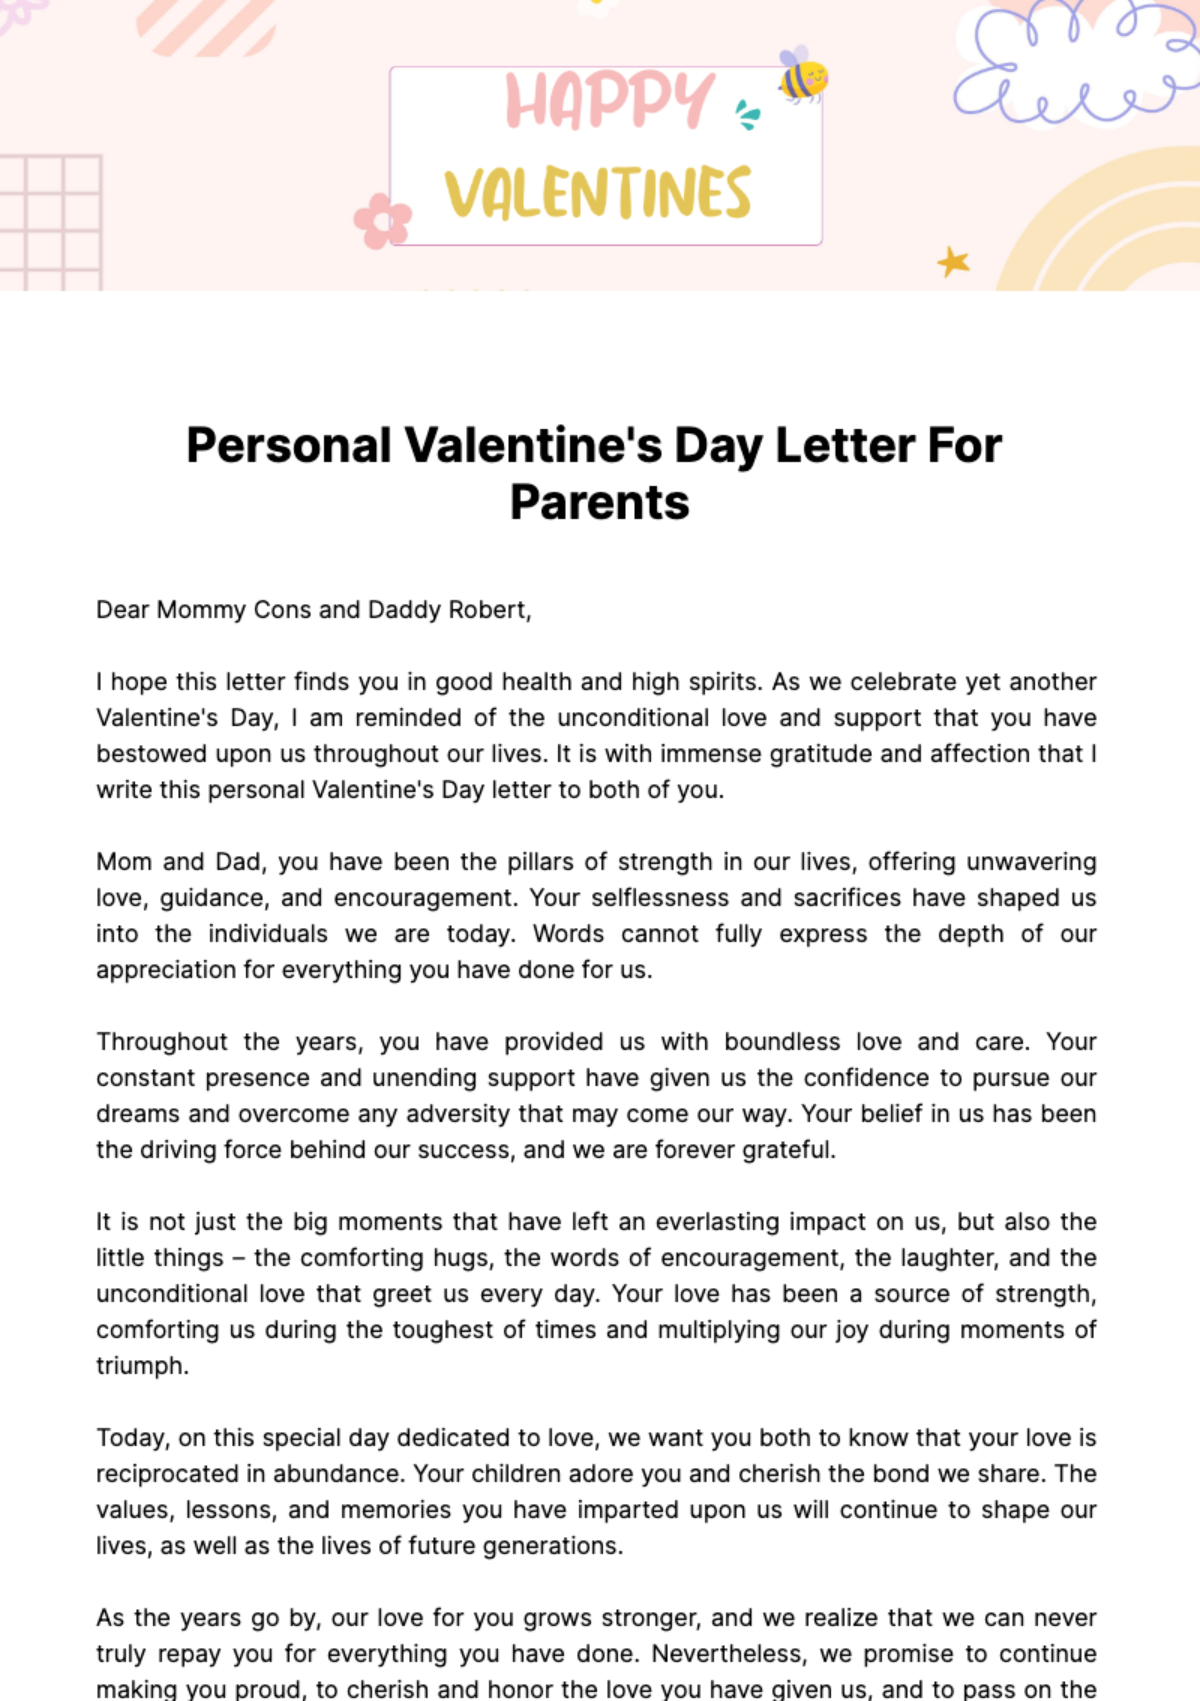 Free Personal Valentine's Day Letter for Parents Template